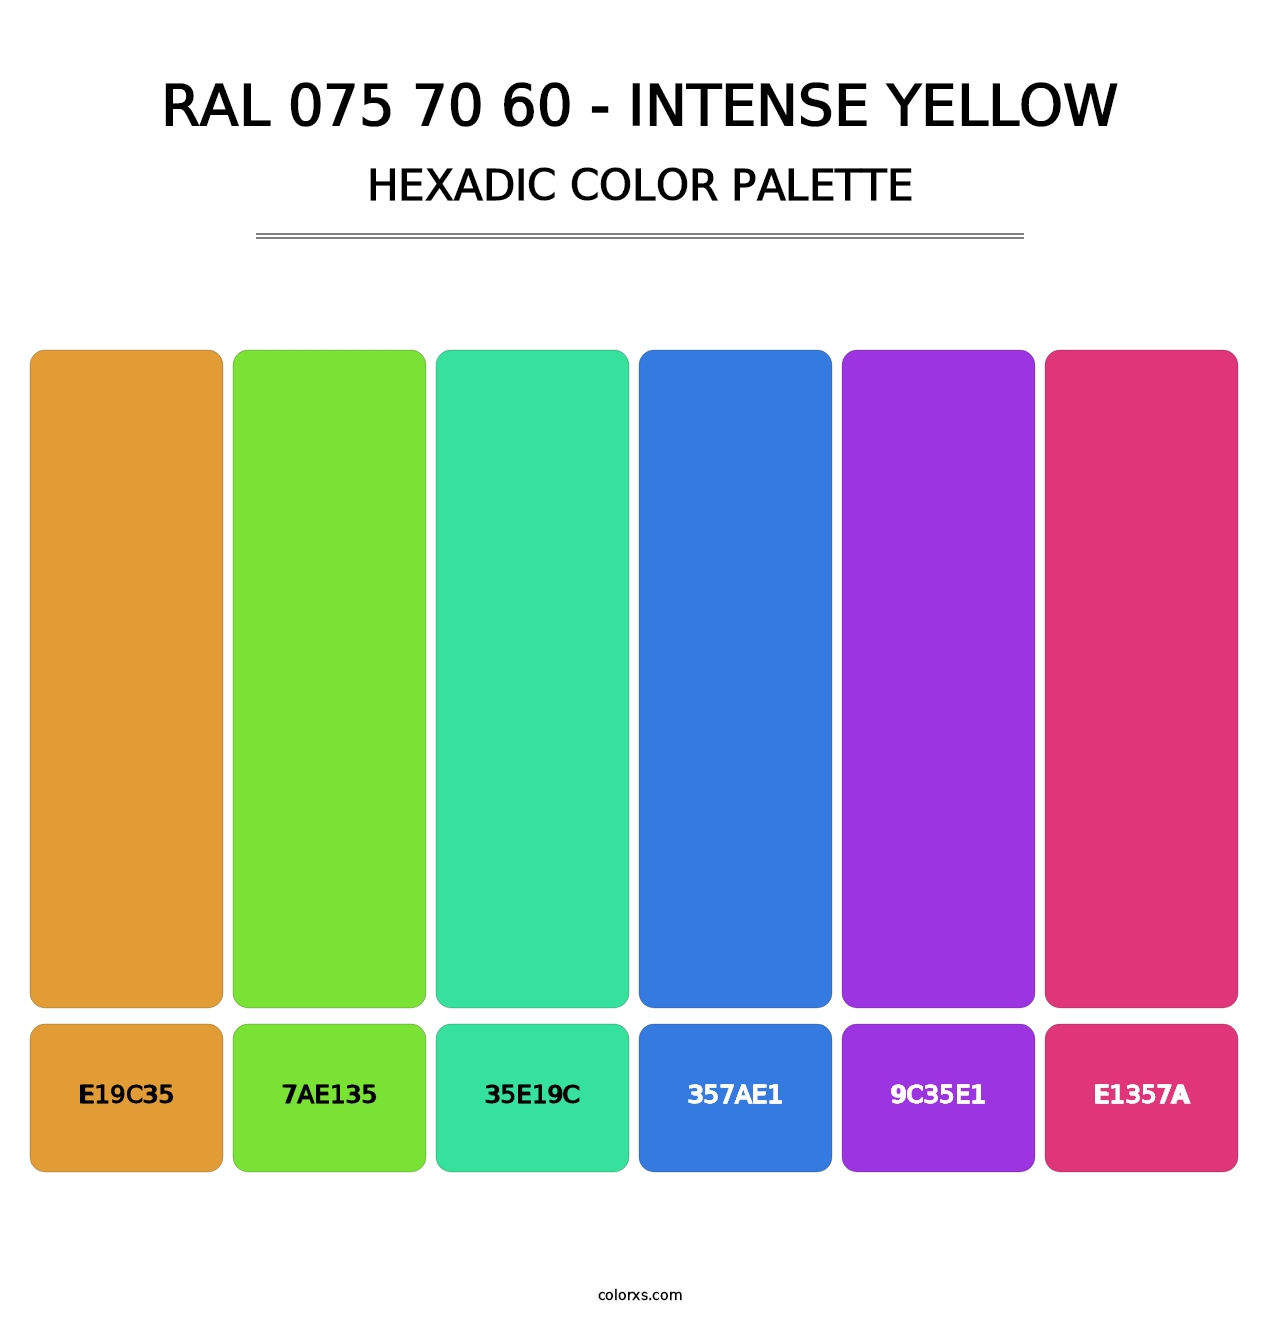 RAL 075 70 60 - Intense Yellow - Hexadic Color Palette